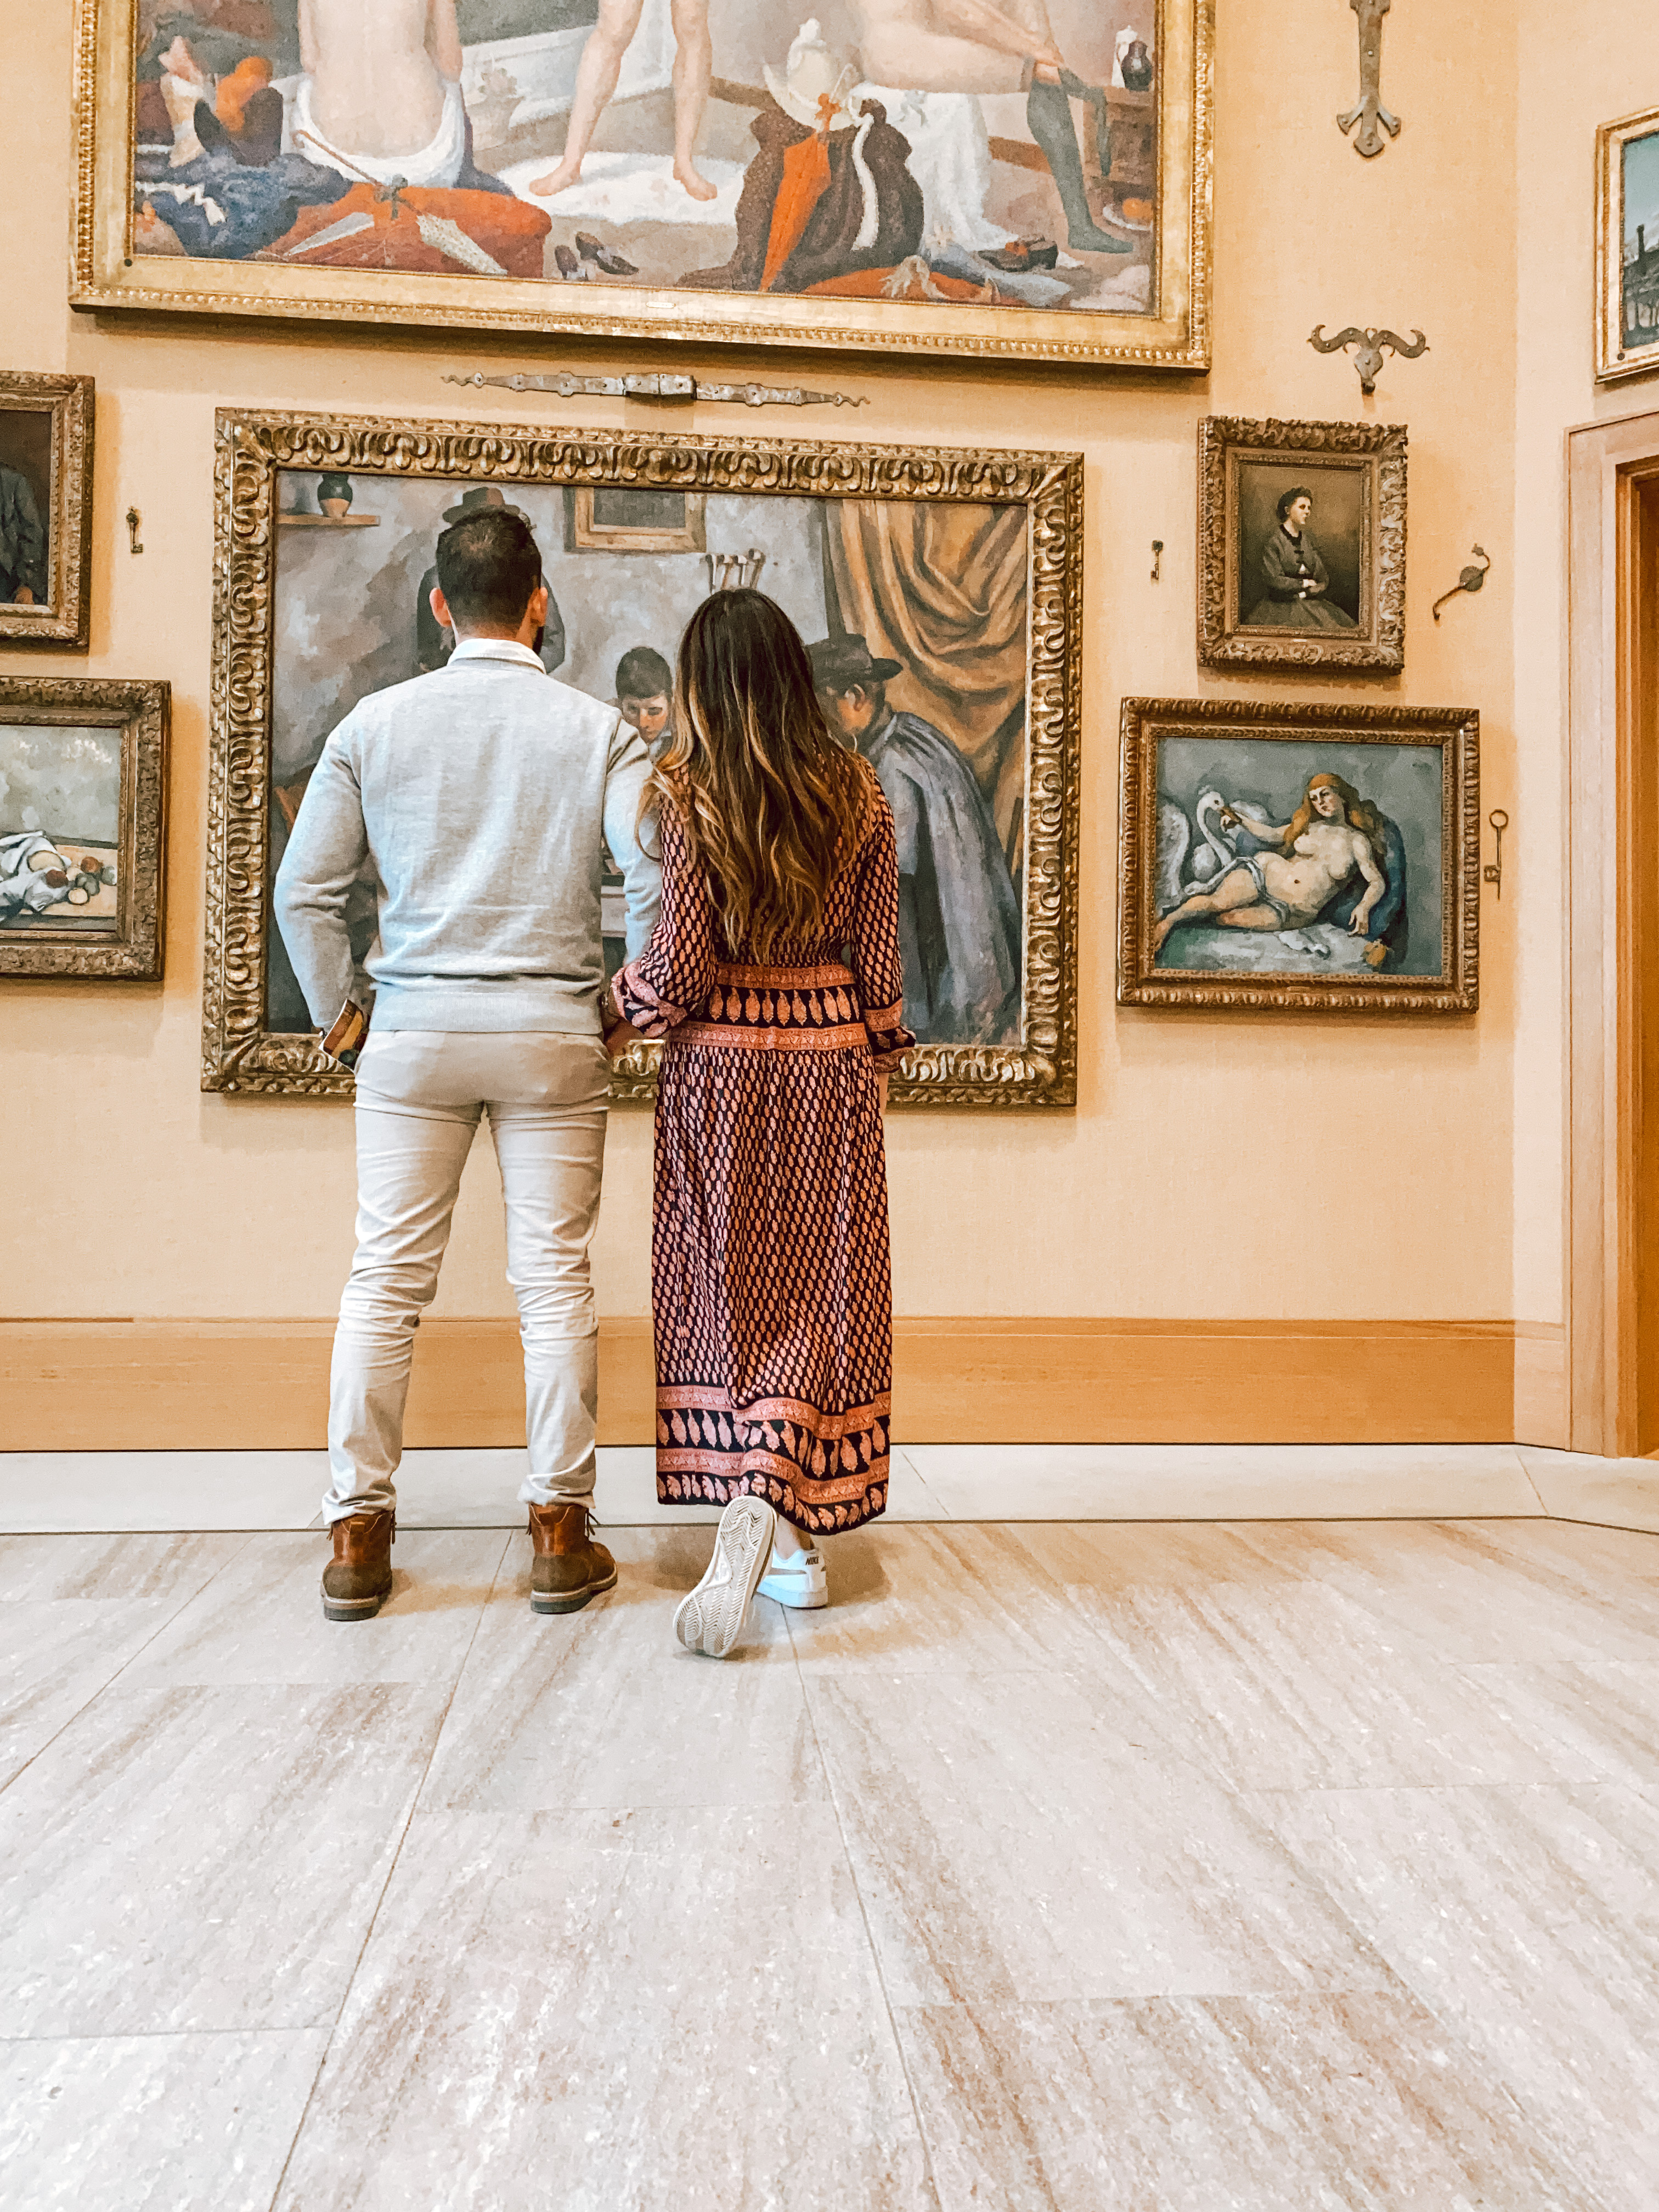 Lifestyle Blogger Chocolate and Lace shares her visit to the Barnes Foundation in Philadelphia, PA.